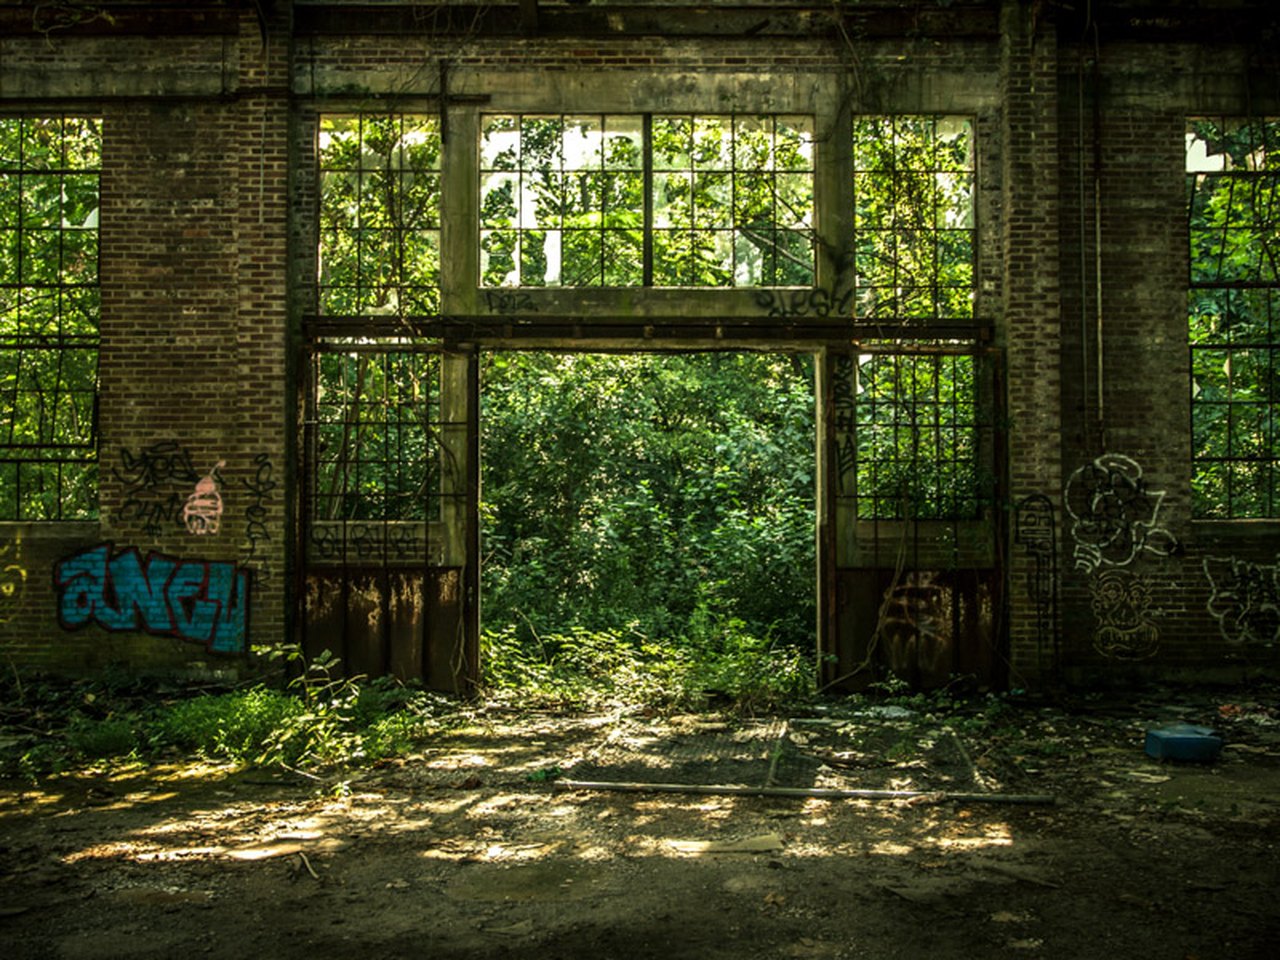 Discover Some Of America's Most Eerie, Abandoned Places